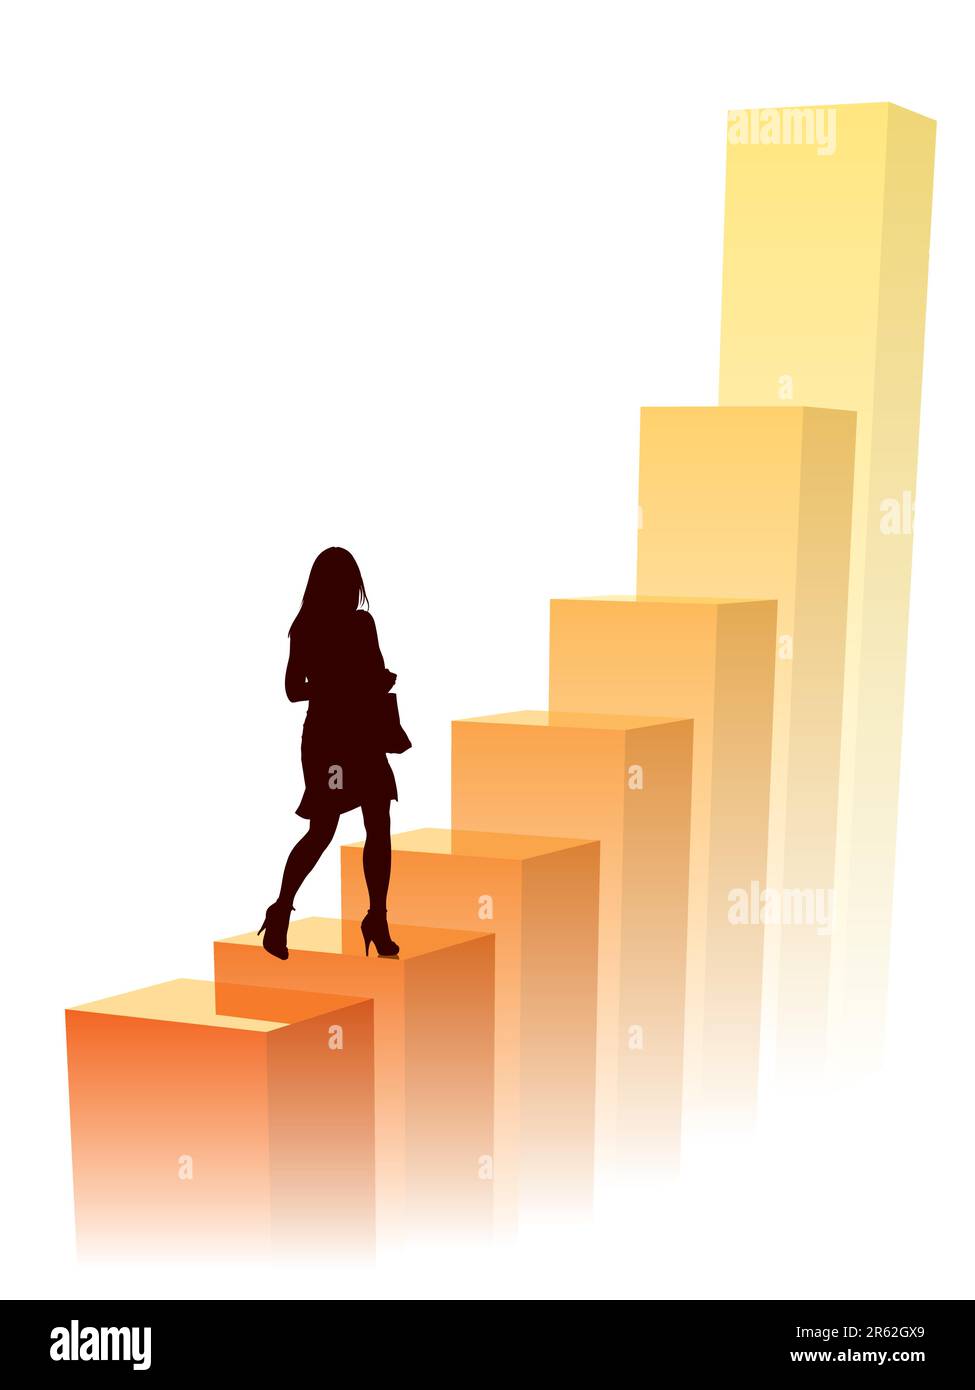 Businesswoman in a hurry, conceptual business illustration. Stock Vector